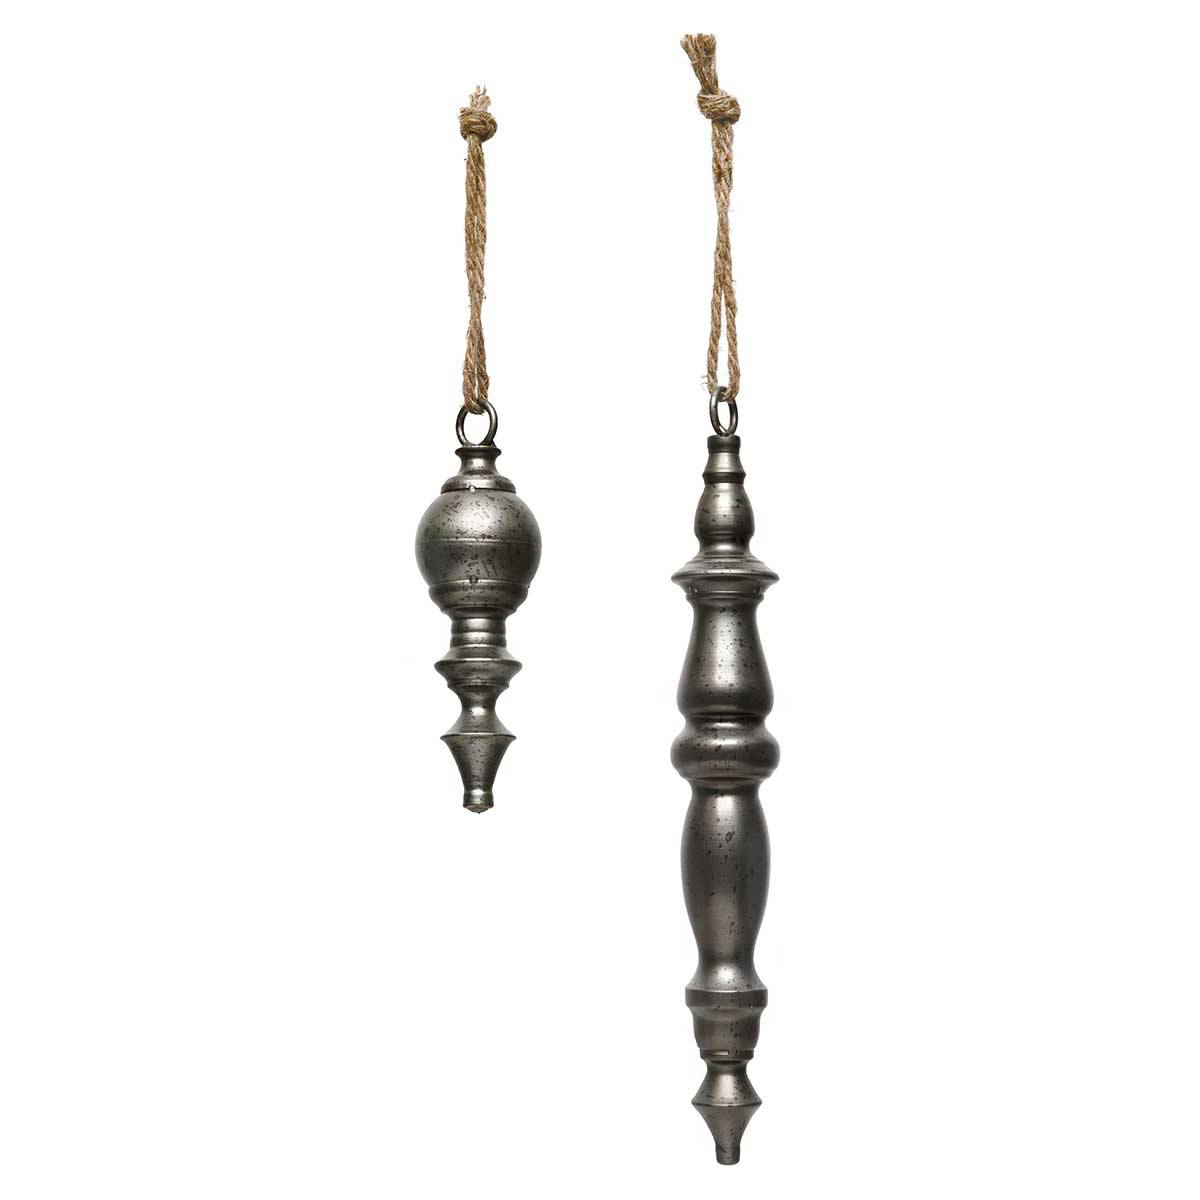 ORNAMENT HANGING FINIAL LARGE 2.5IN X 16IN PEWTER METAL